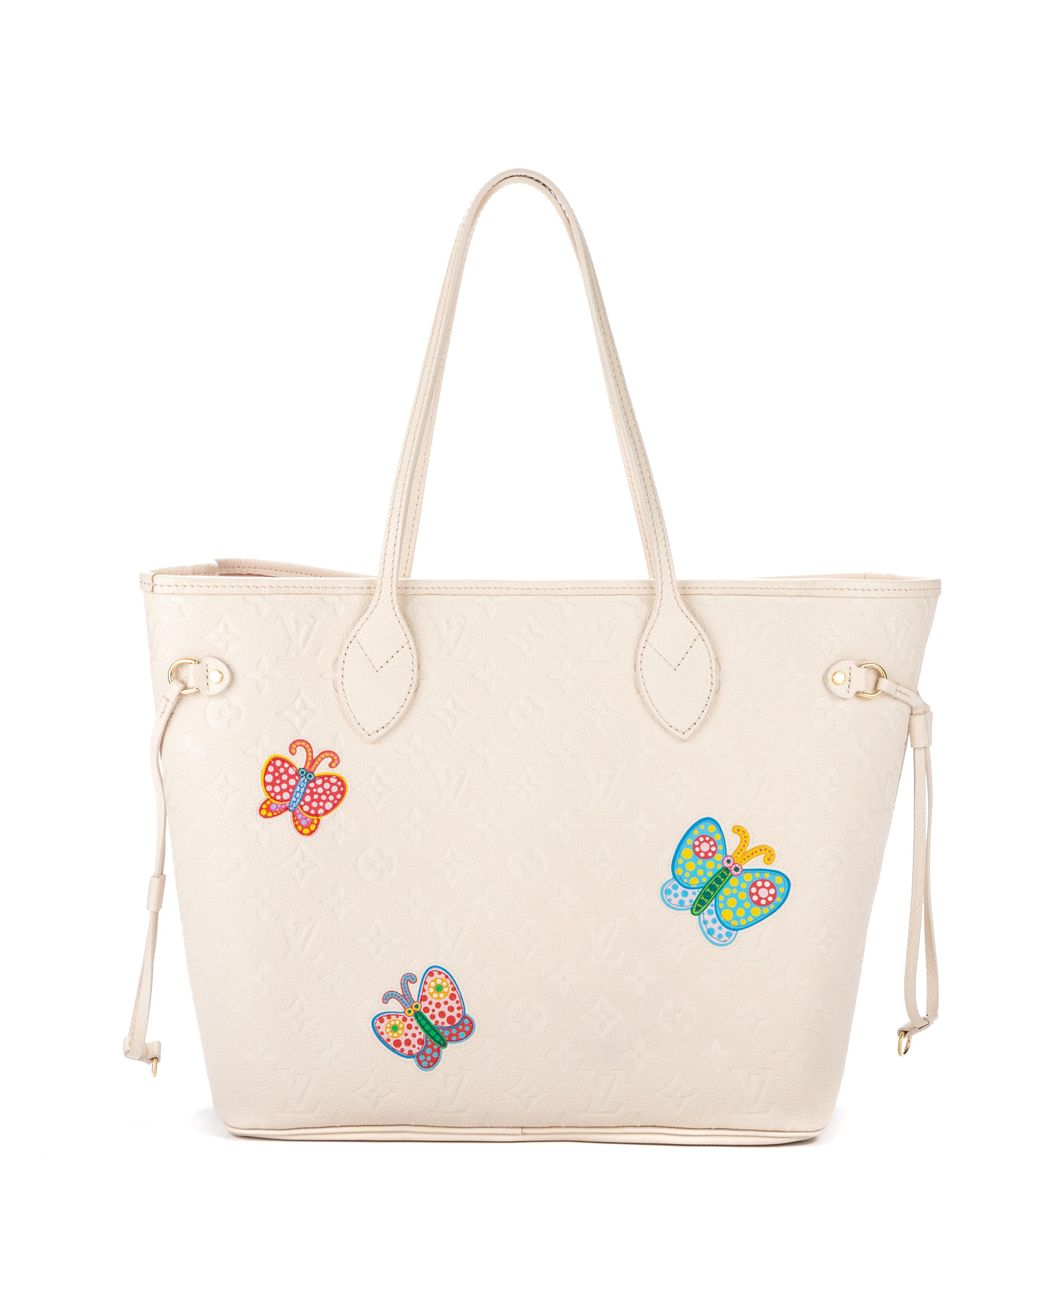 Louis Vuitton 2010 pre-owned Neverfull PM tote bag, White